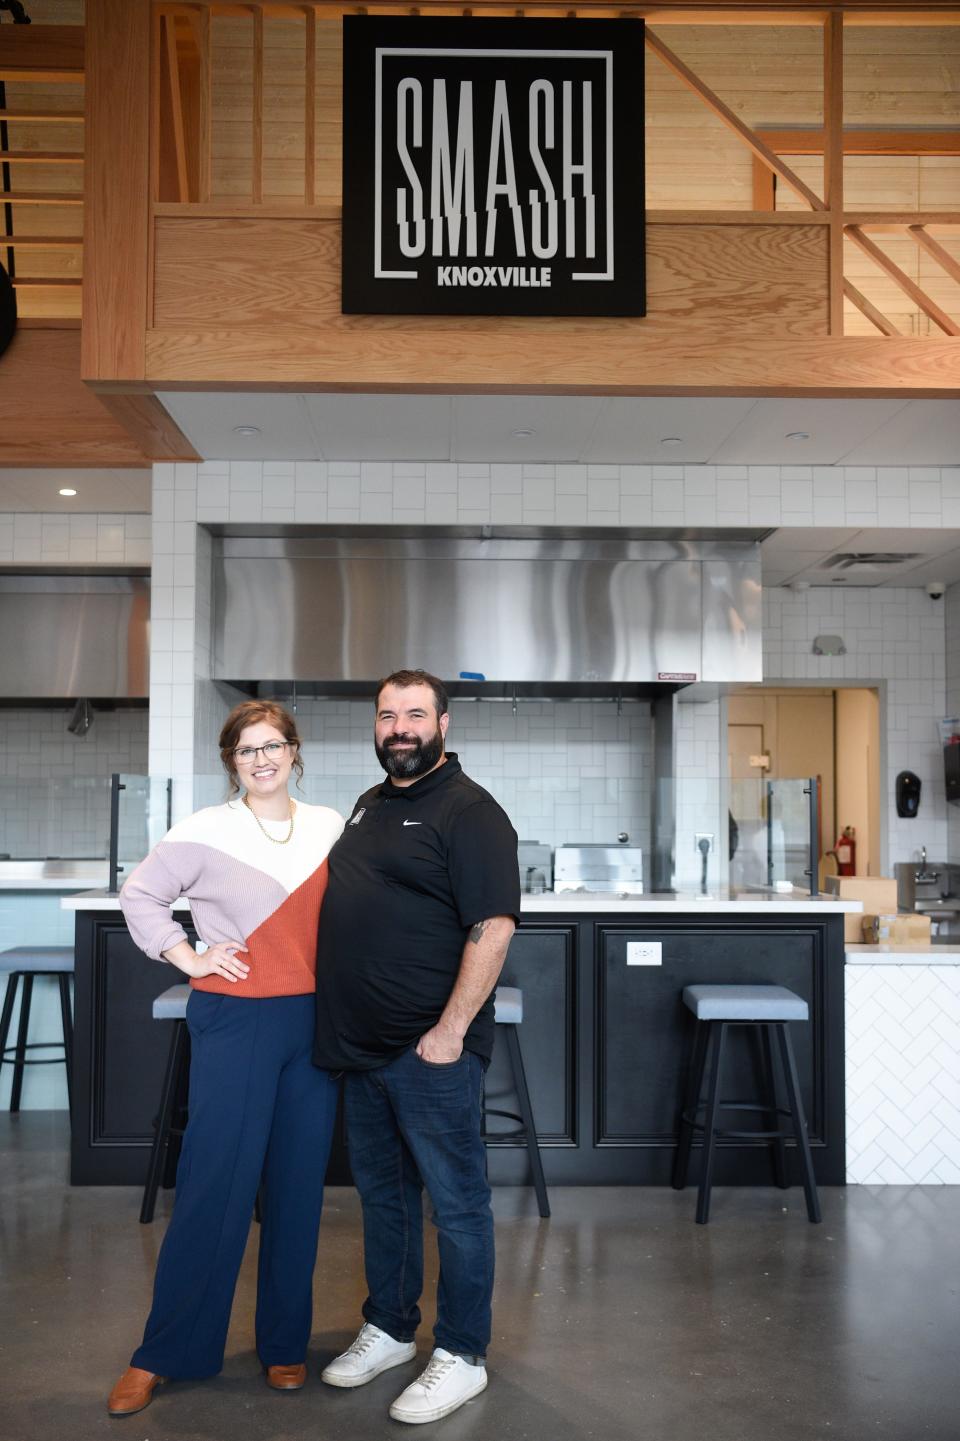 Ashley and Paul Moody, owners of Smash Knoxville, are preparing to bring back their original Lanai concept as a pop-up at Marble City Market while simultaneously planning additional Smash concepts for food halls in other cities. The business name is changing to Smash City as part of their expansion.